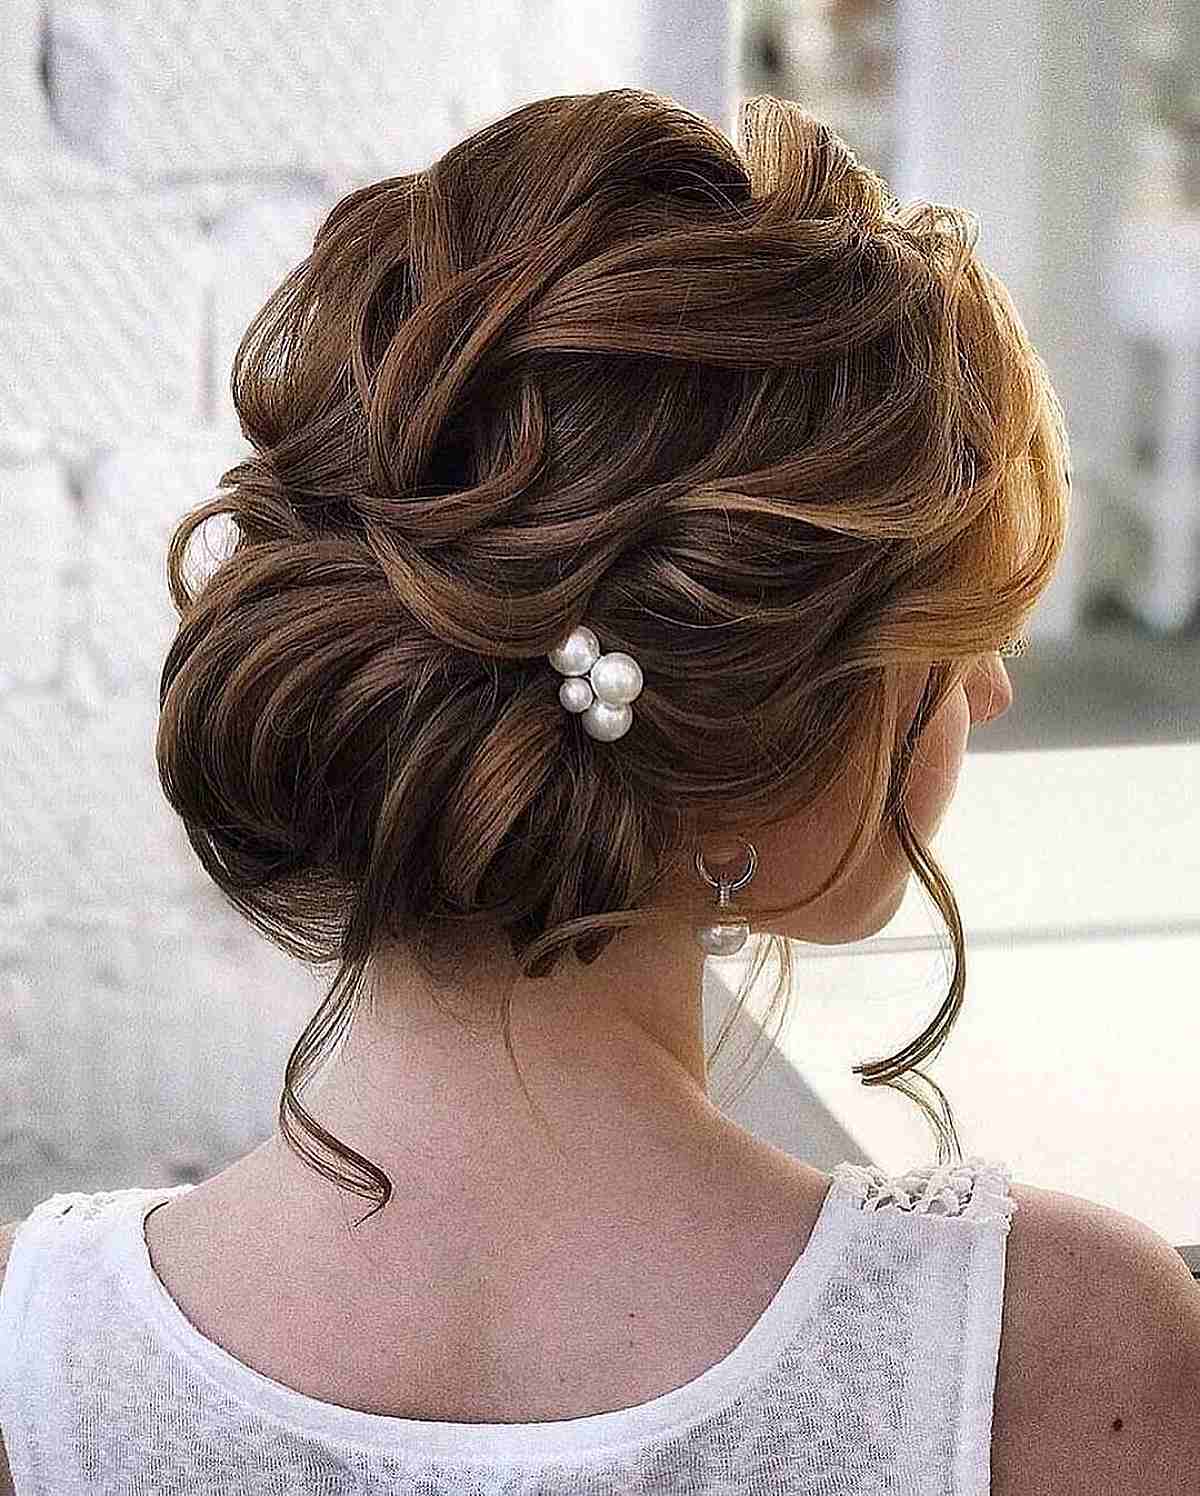 Stunning Loose Updo with Pearls